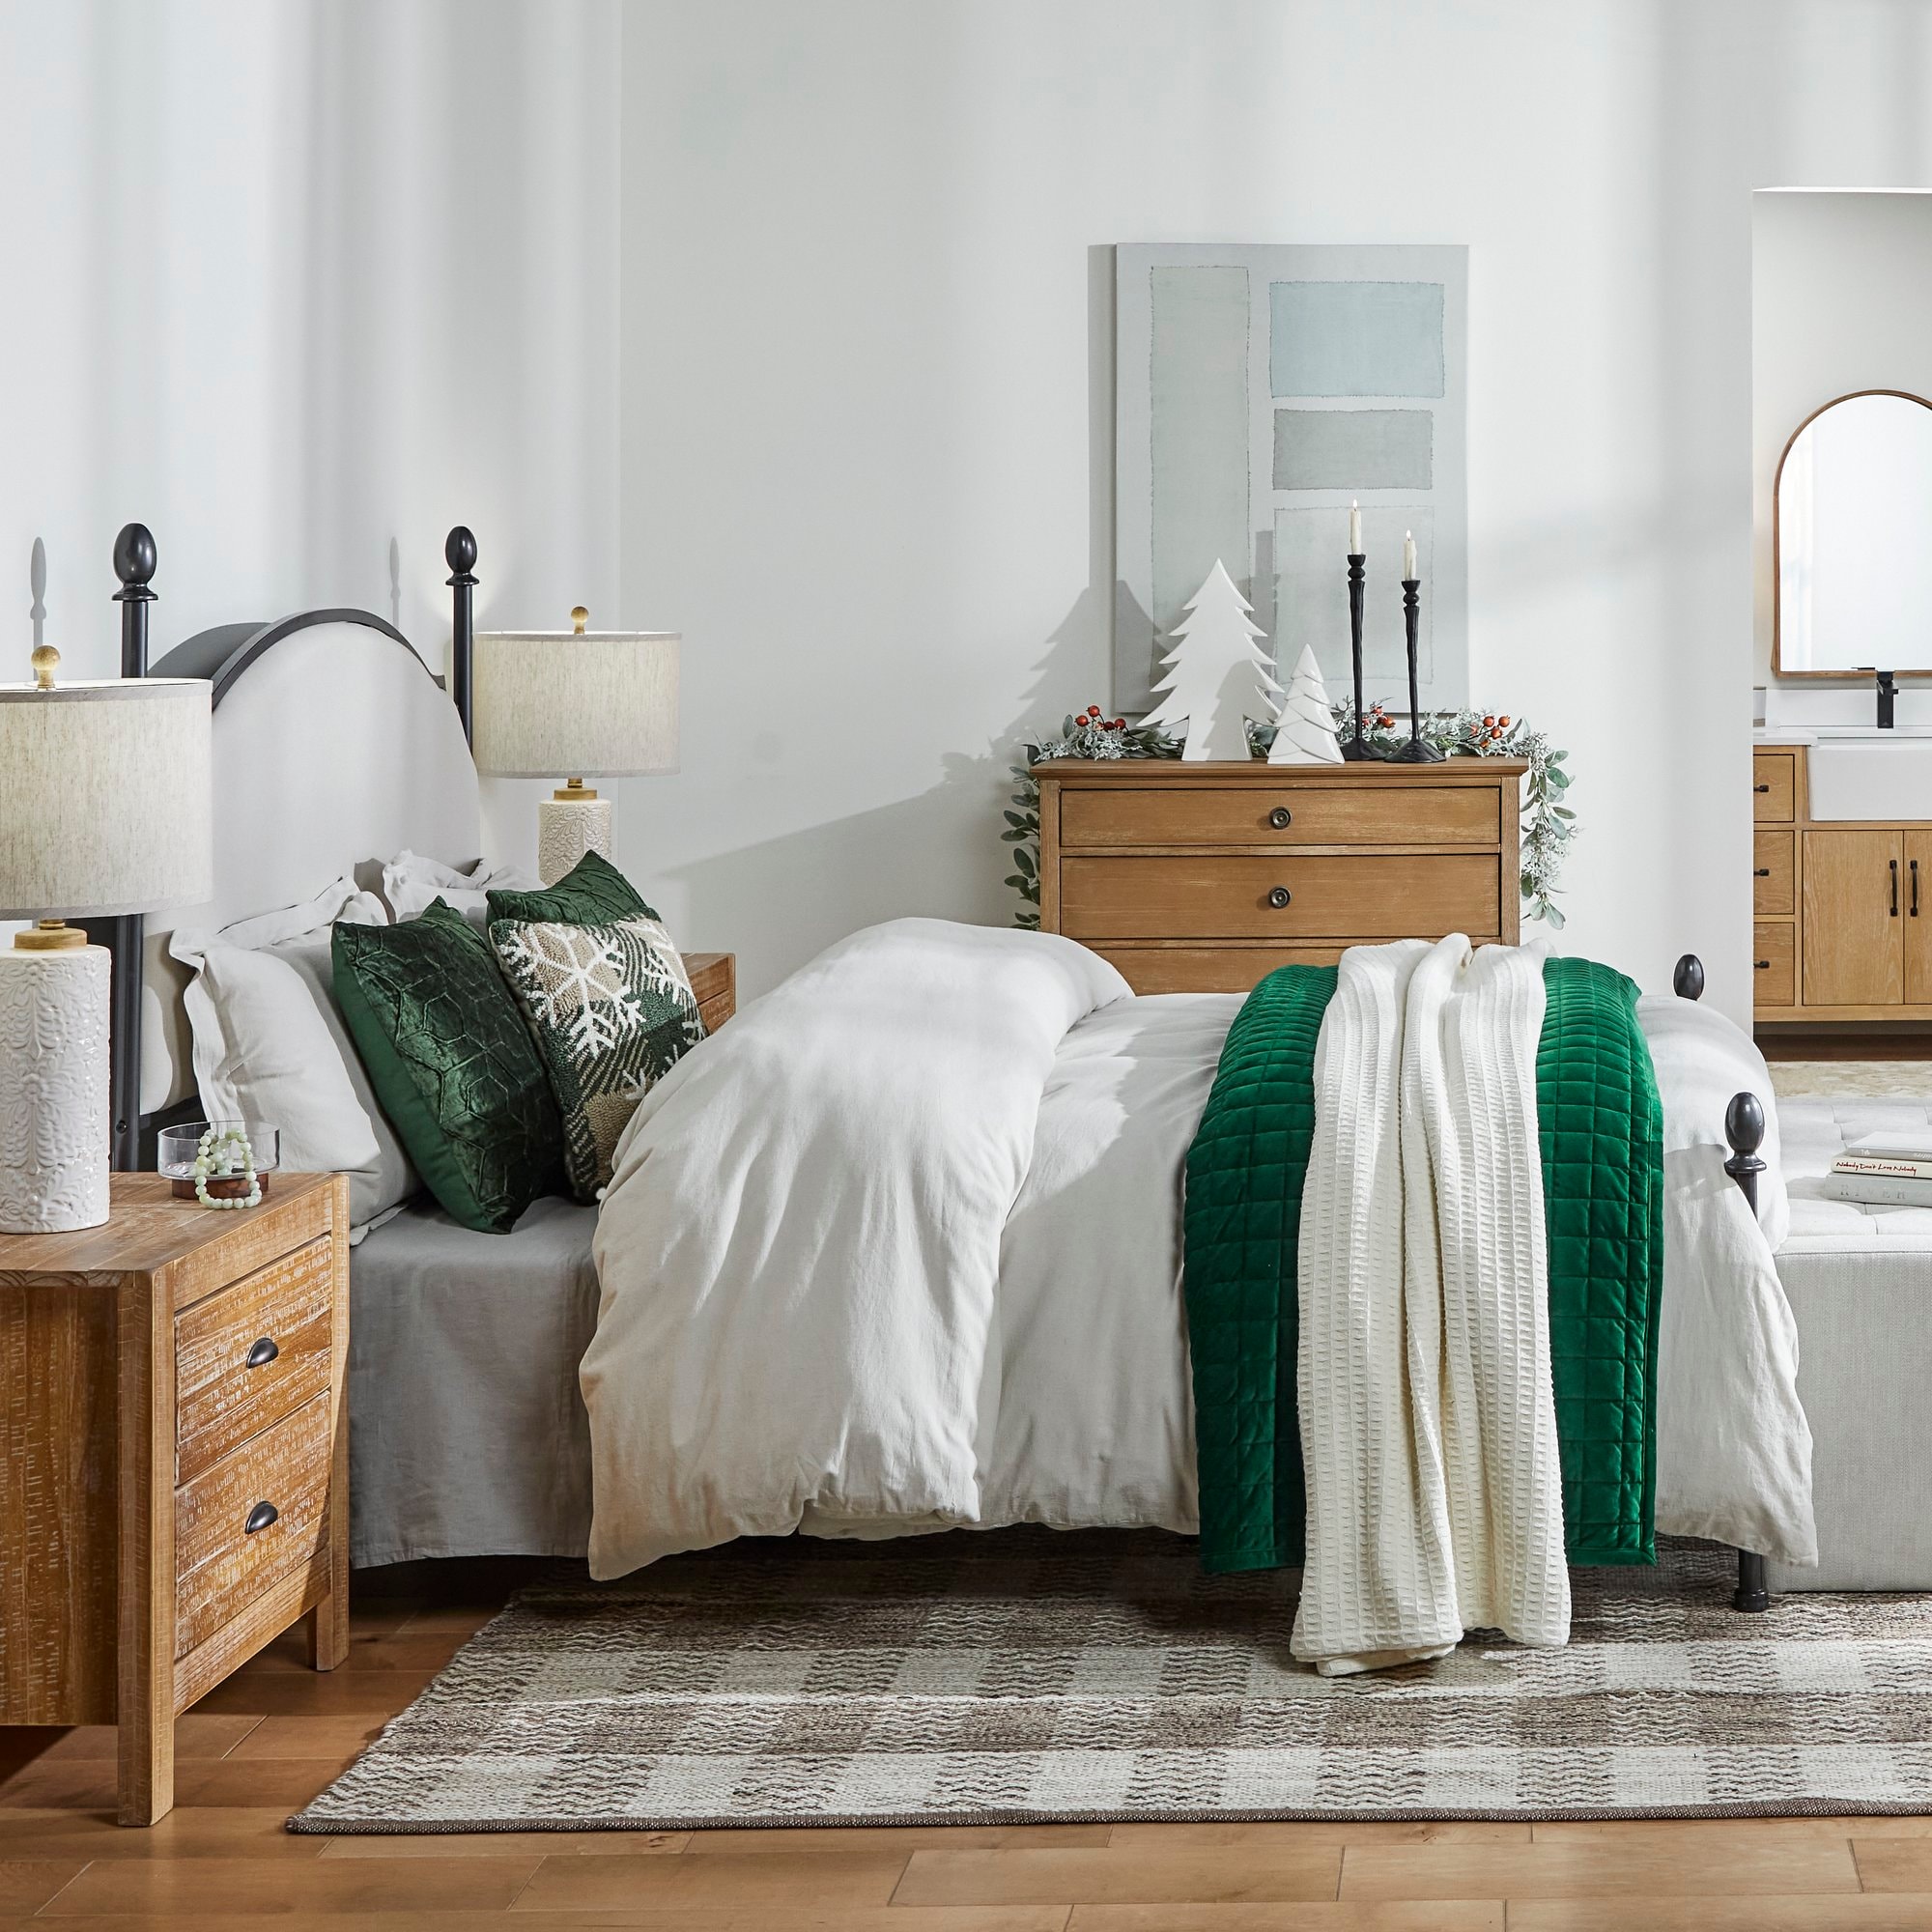 save an extra 15% on Select Bedding*